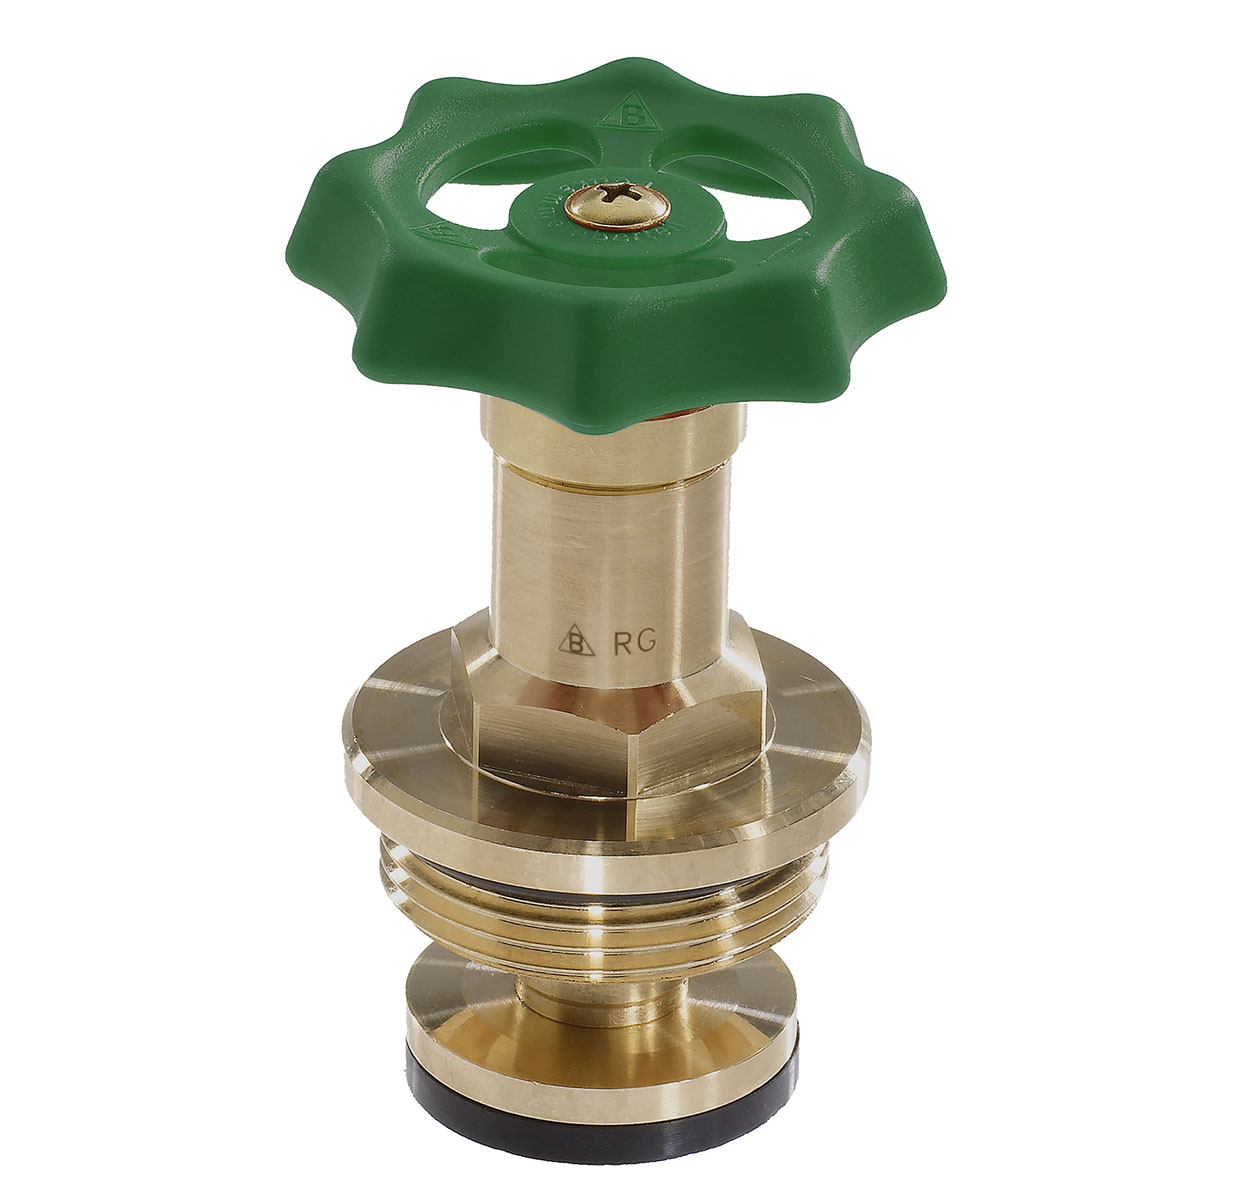 1274320 - Cuphin Upper-part with grease chamber SOFT-drive-system, for free-flow valves, non-rising spindle